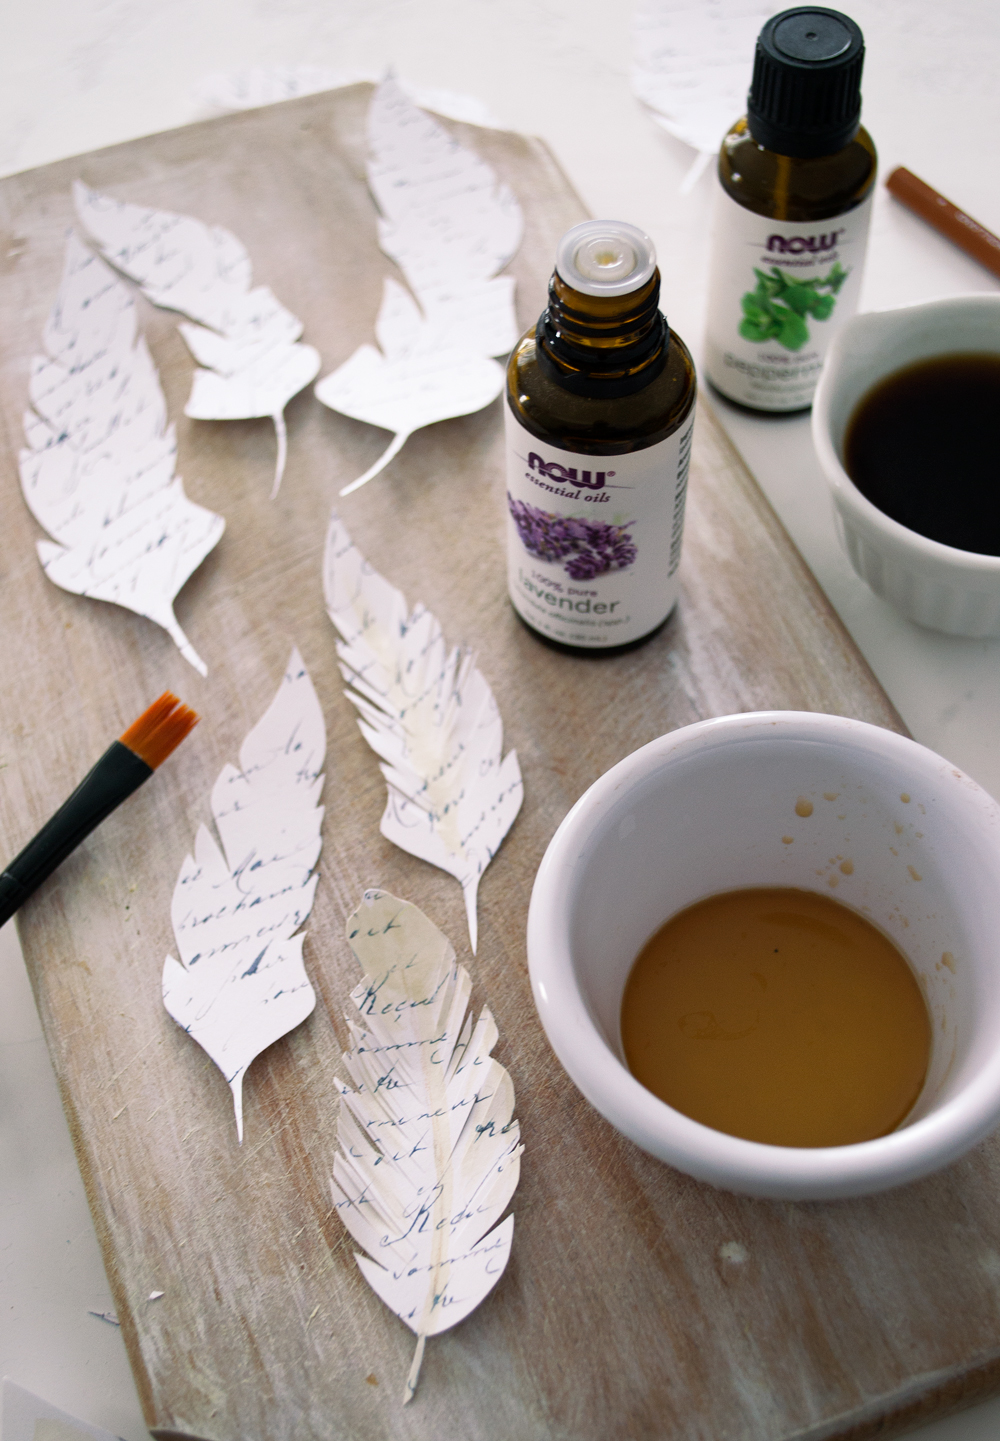 Staining paper with coffee